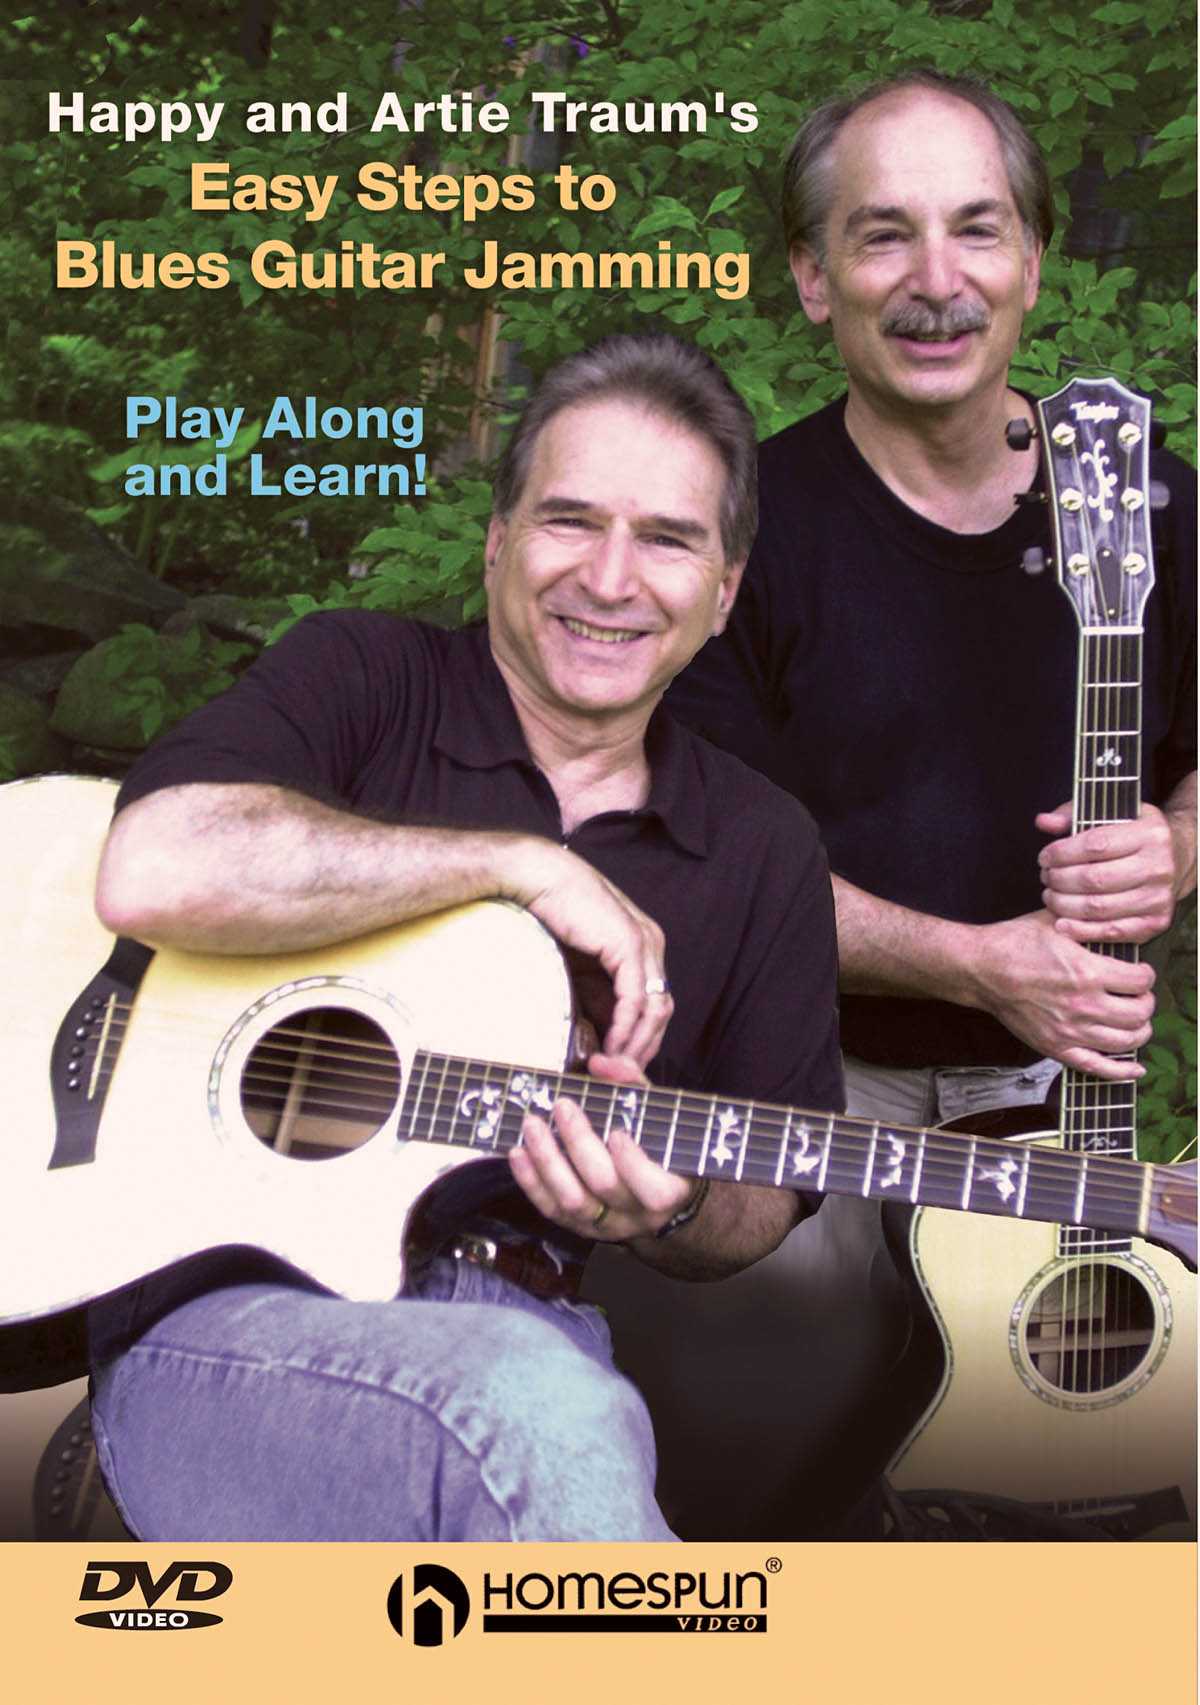 Image 1 of DVD - Happy and Artie Traum's Easy Steps to Blues Guitar Jamming: Vol. 1 - SKU# 300-DVD241 : Product Type Media : Elderly Instruments